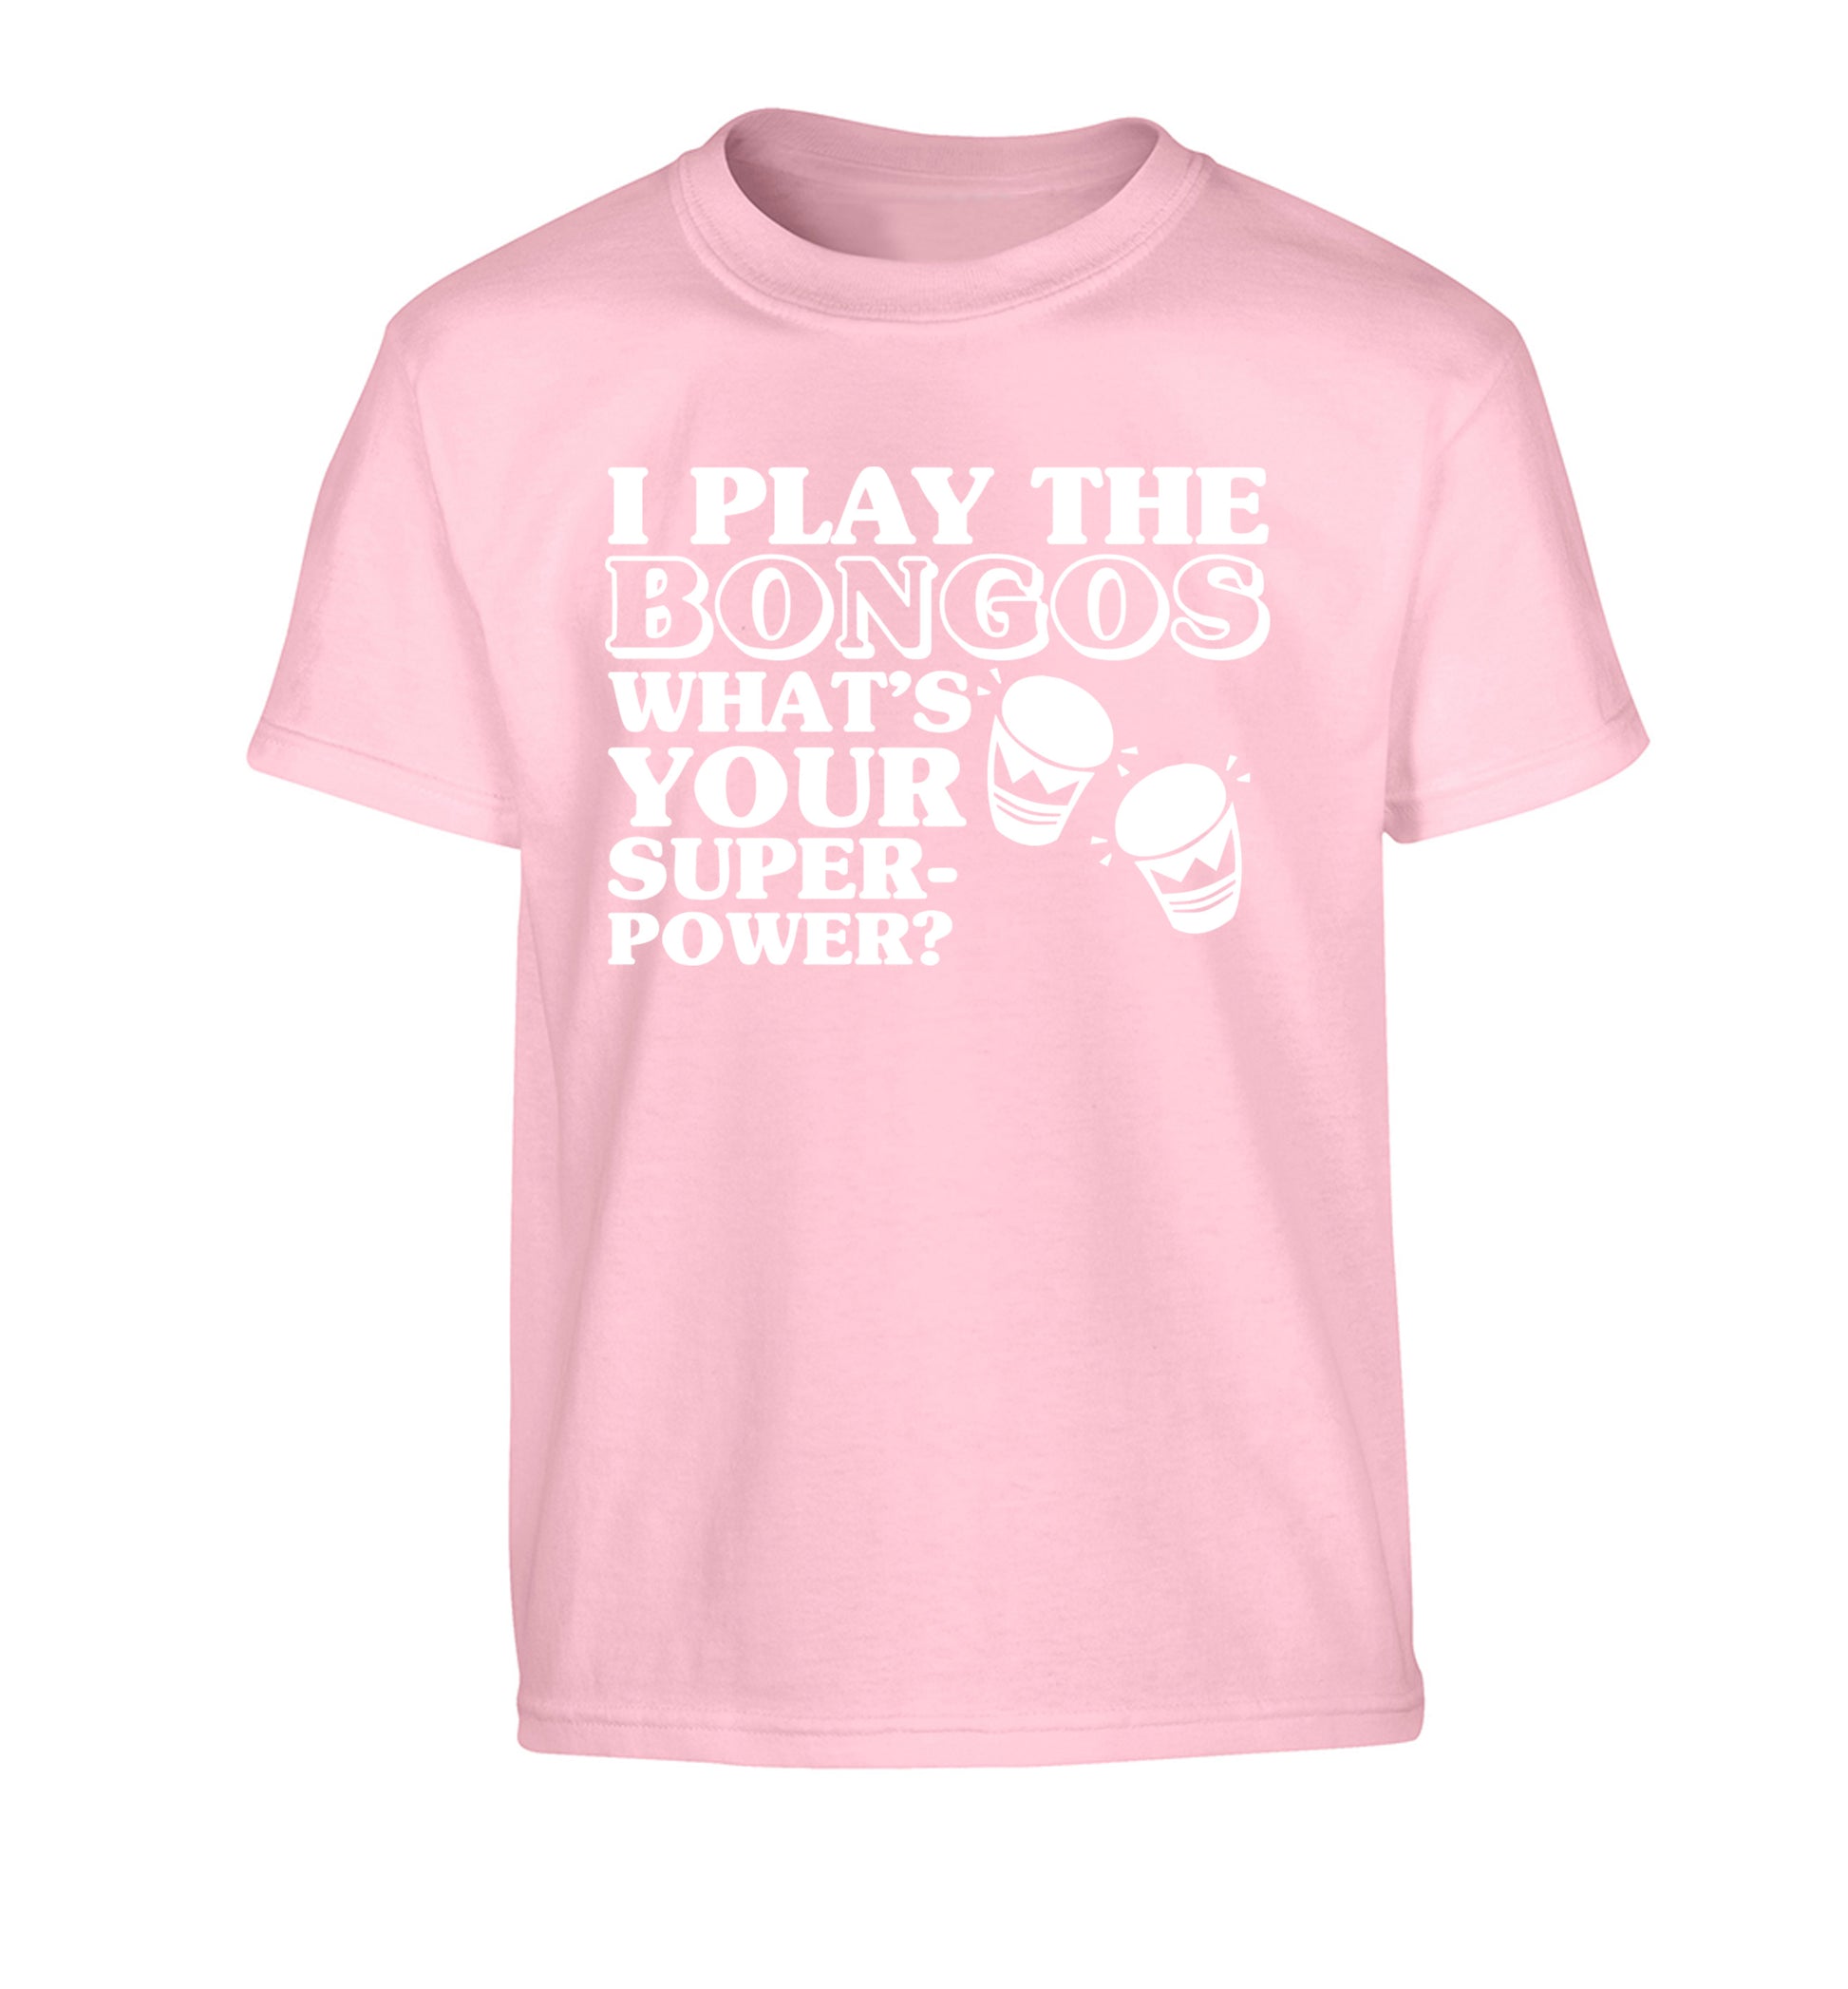 I play the bongos what's your superpower? Children's light pink Tshirt 12-14 Years